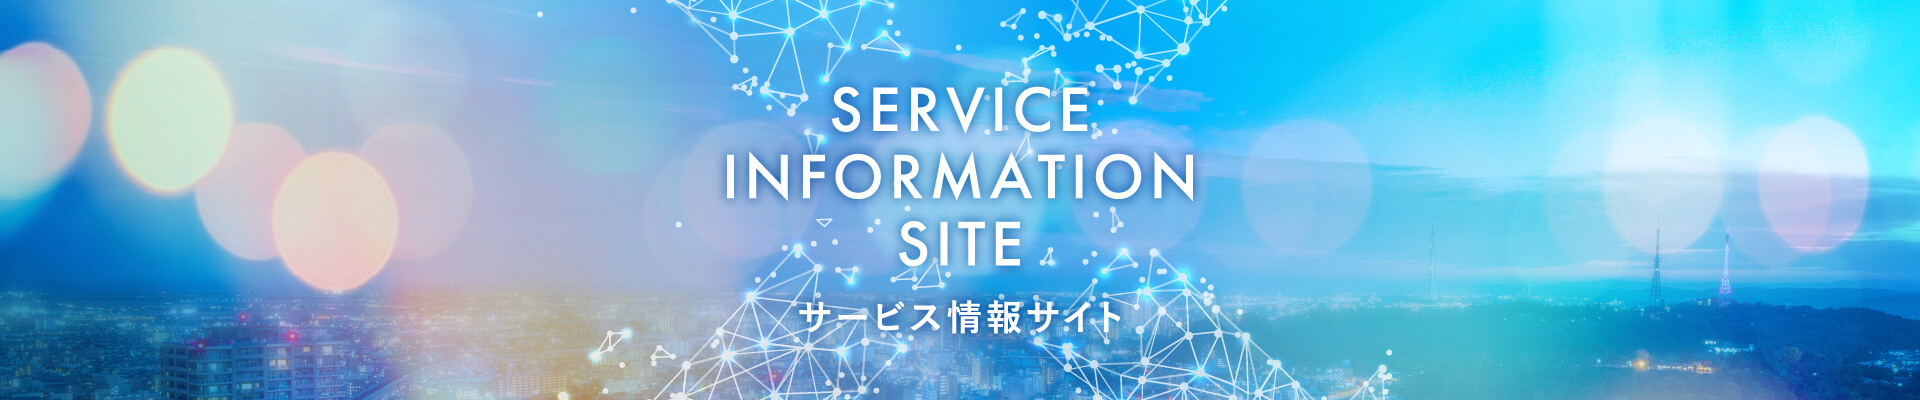 SERVICE INFORMATION SITEサービス情報サイト